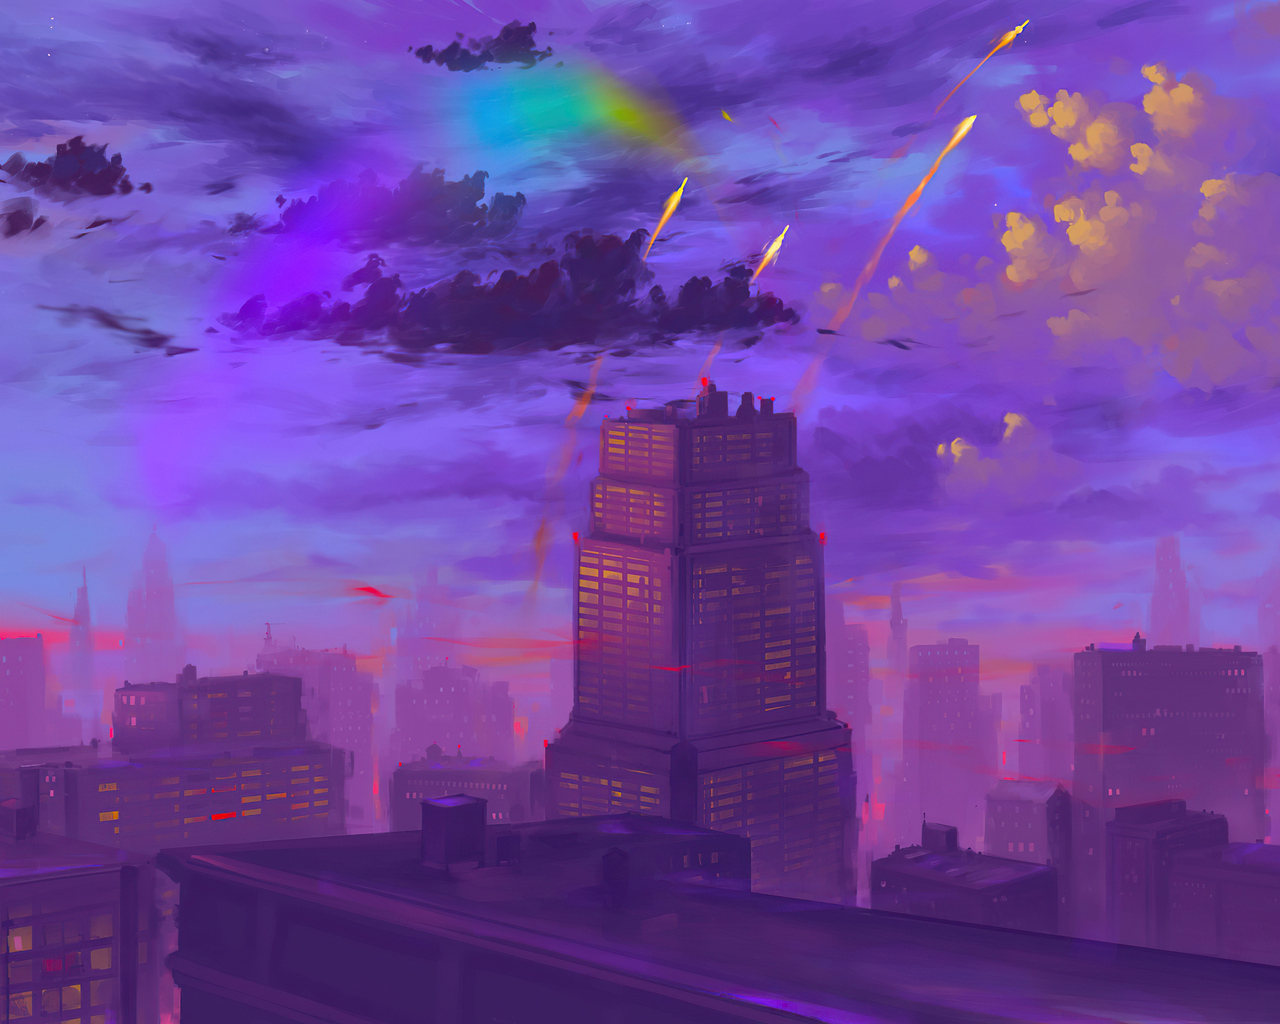 A purple sky with clouds and buildings - Twilight